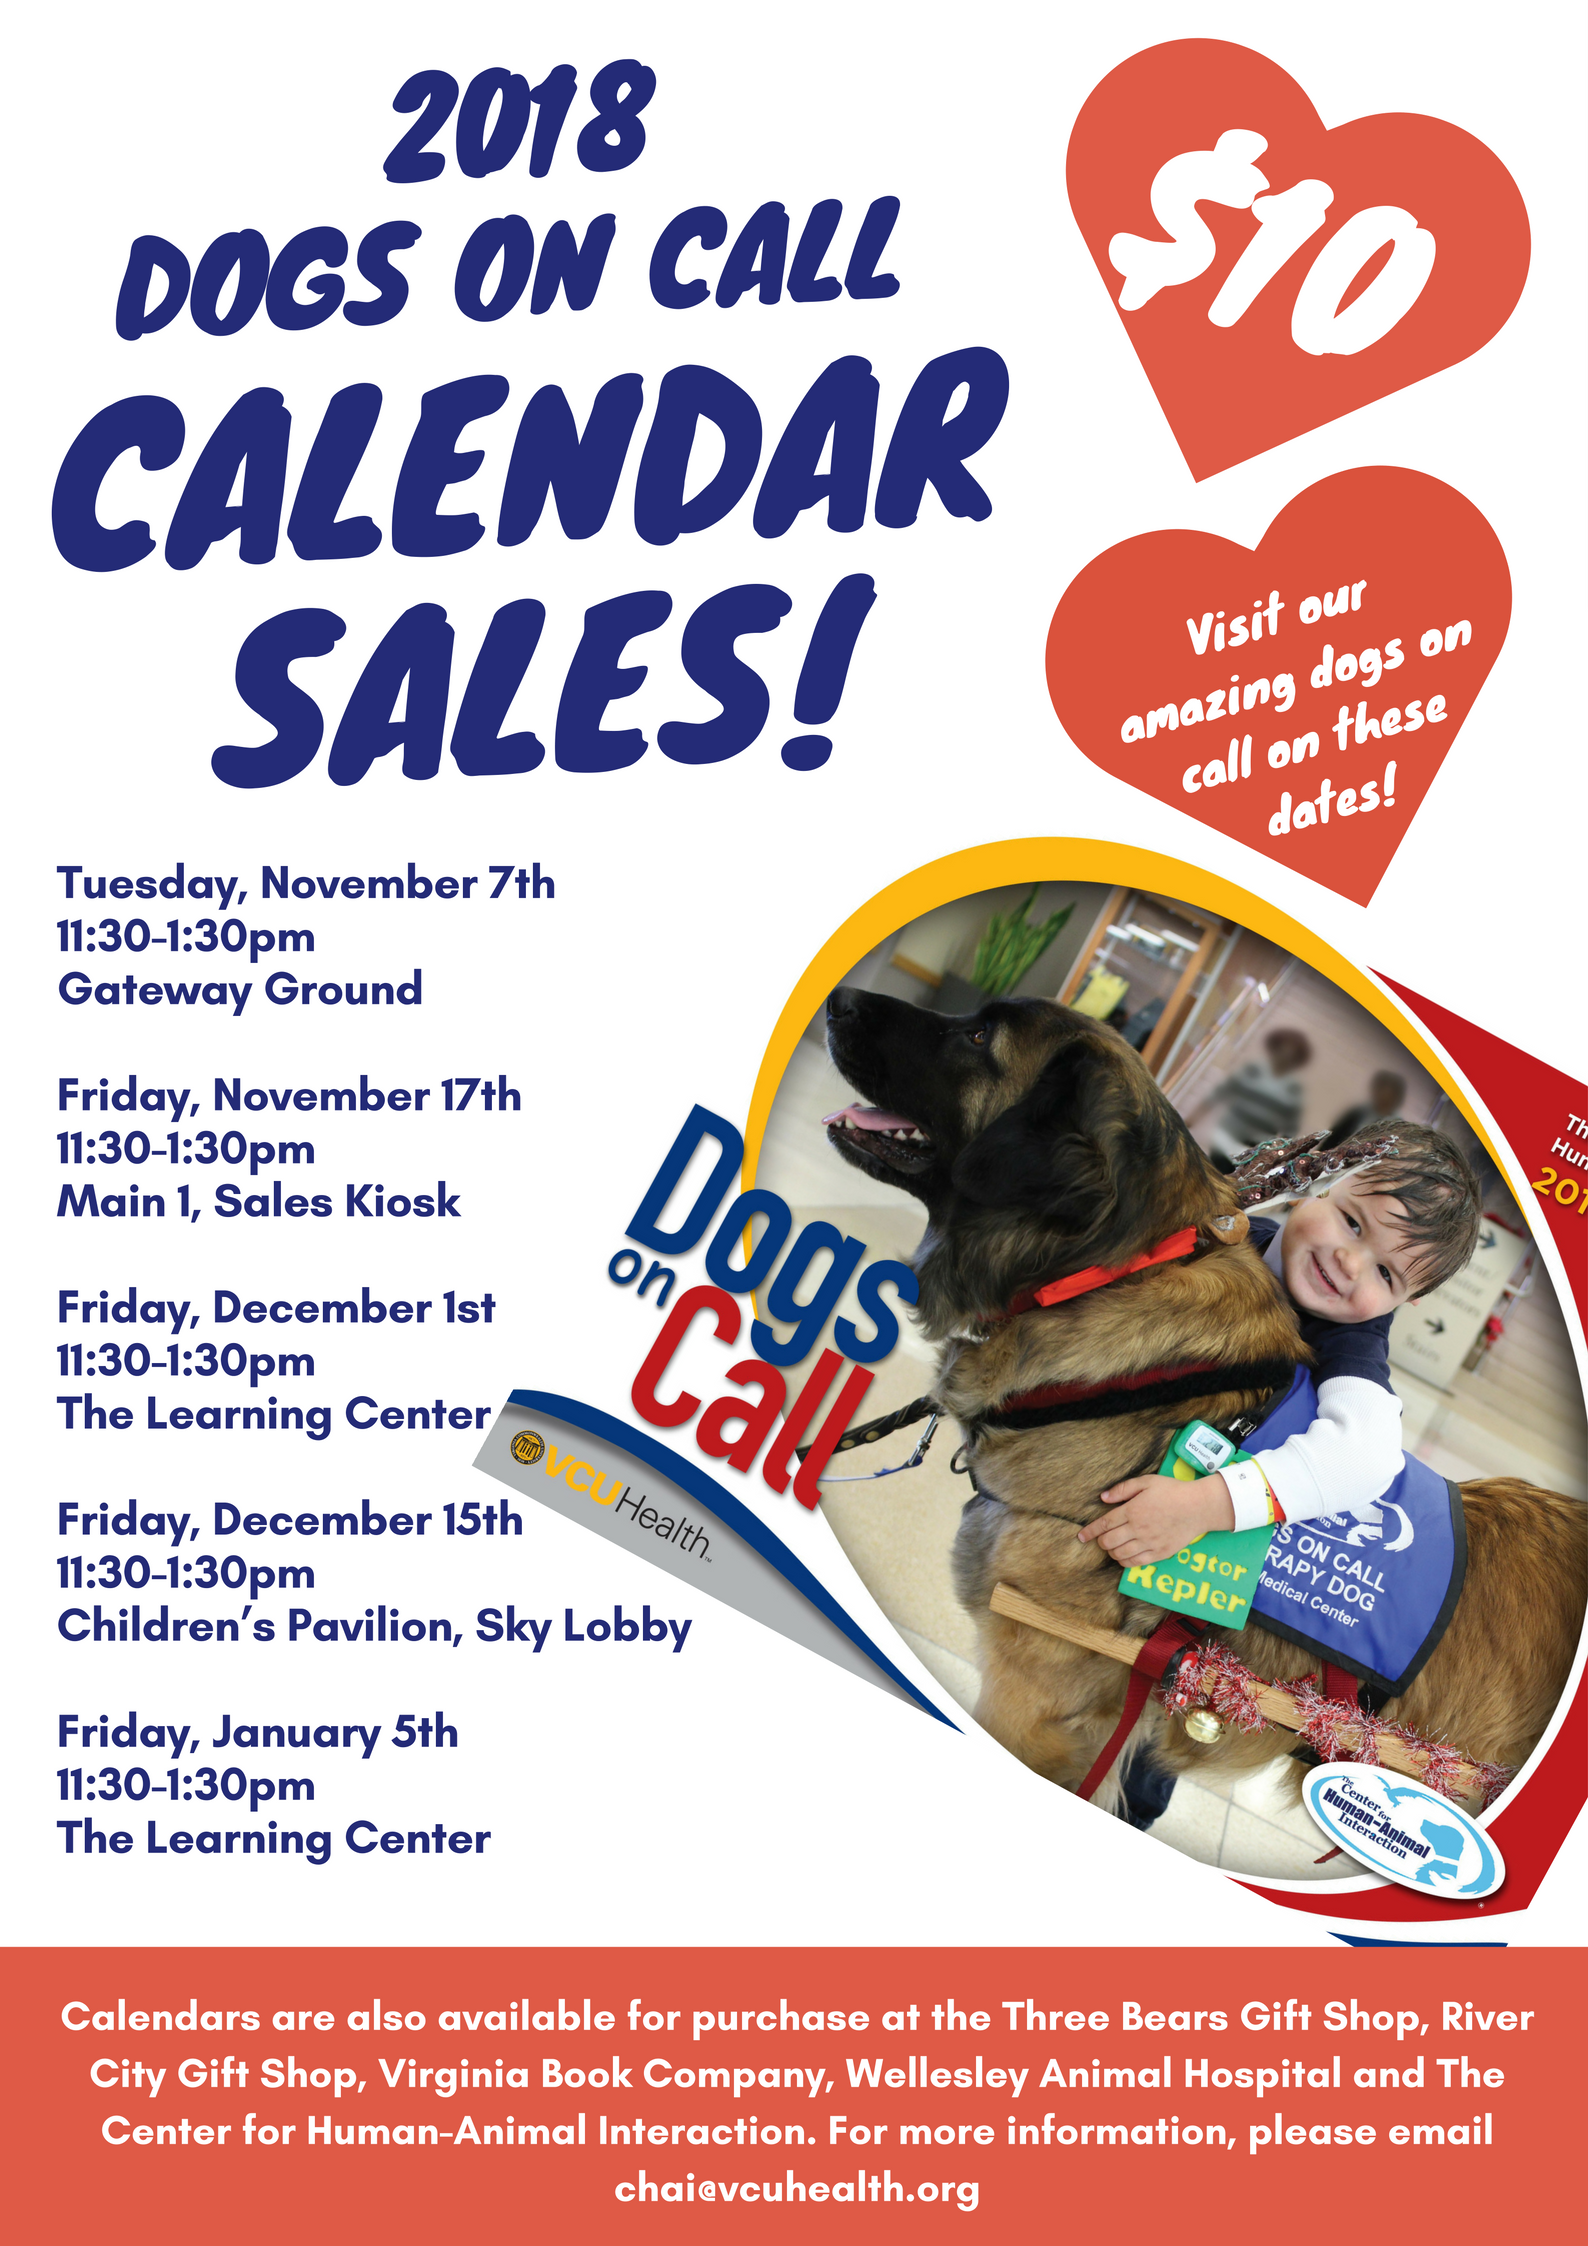 2018 Dogs On Call Calendar Sales Dates  Tuesday, November 7th from 11:30-1:30pm, Gateway Ground Lobby  Friday, November 17th from 11:30-1:30pm, Main 1 Kiosk  Friday, December 1st from 11:30-1:30pm, Main 1 Learning Center  Friday, December 15th from 11:30-1:30pm, Children’s Pavilion Sky Lobby  Friday, January 5th from 11:30-1:30pm, Main 1 Learning Center 